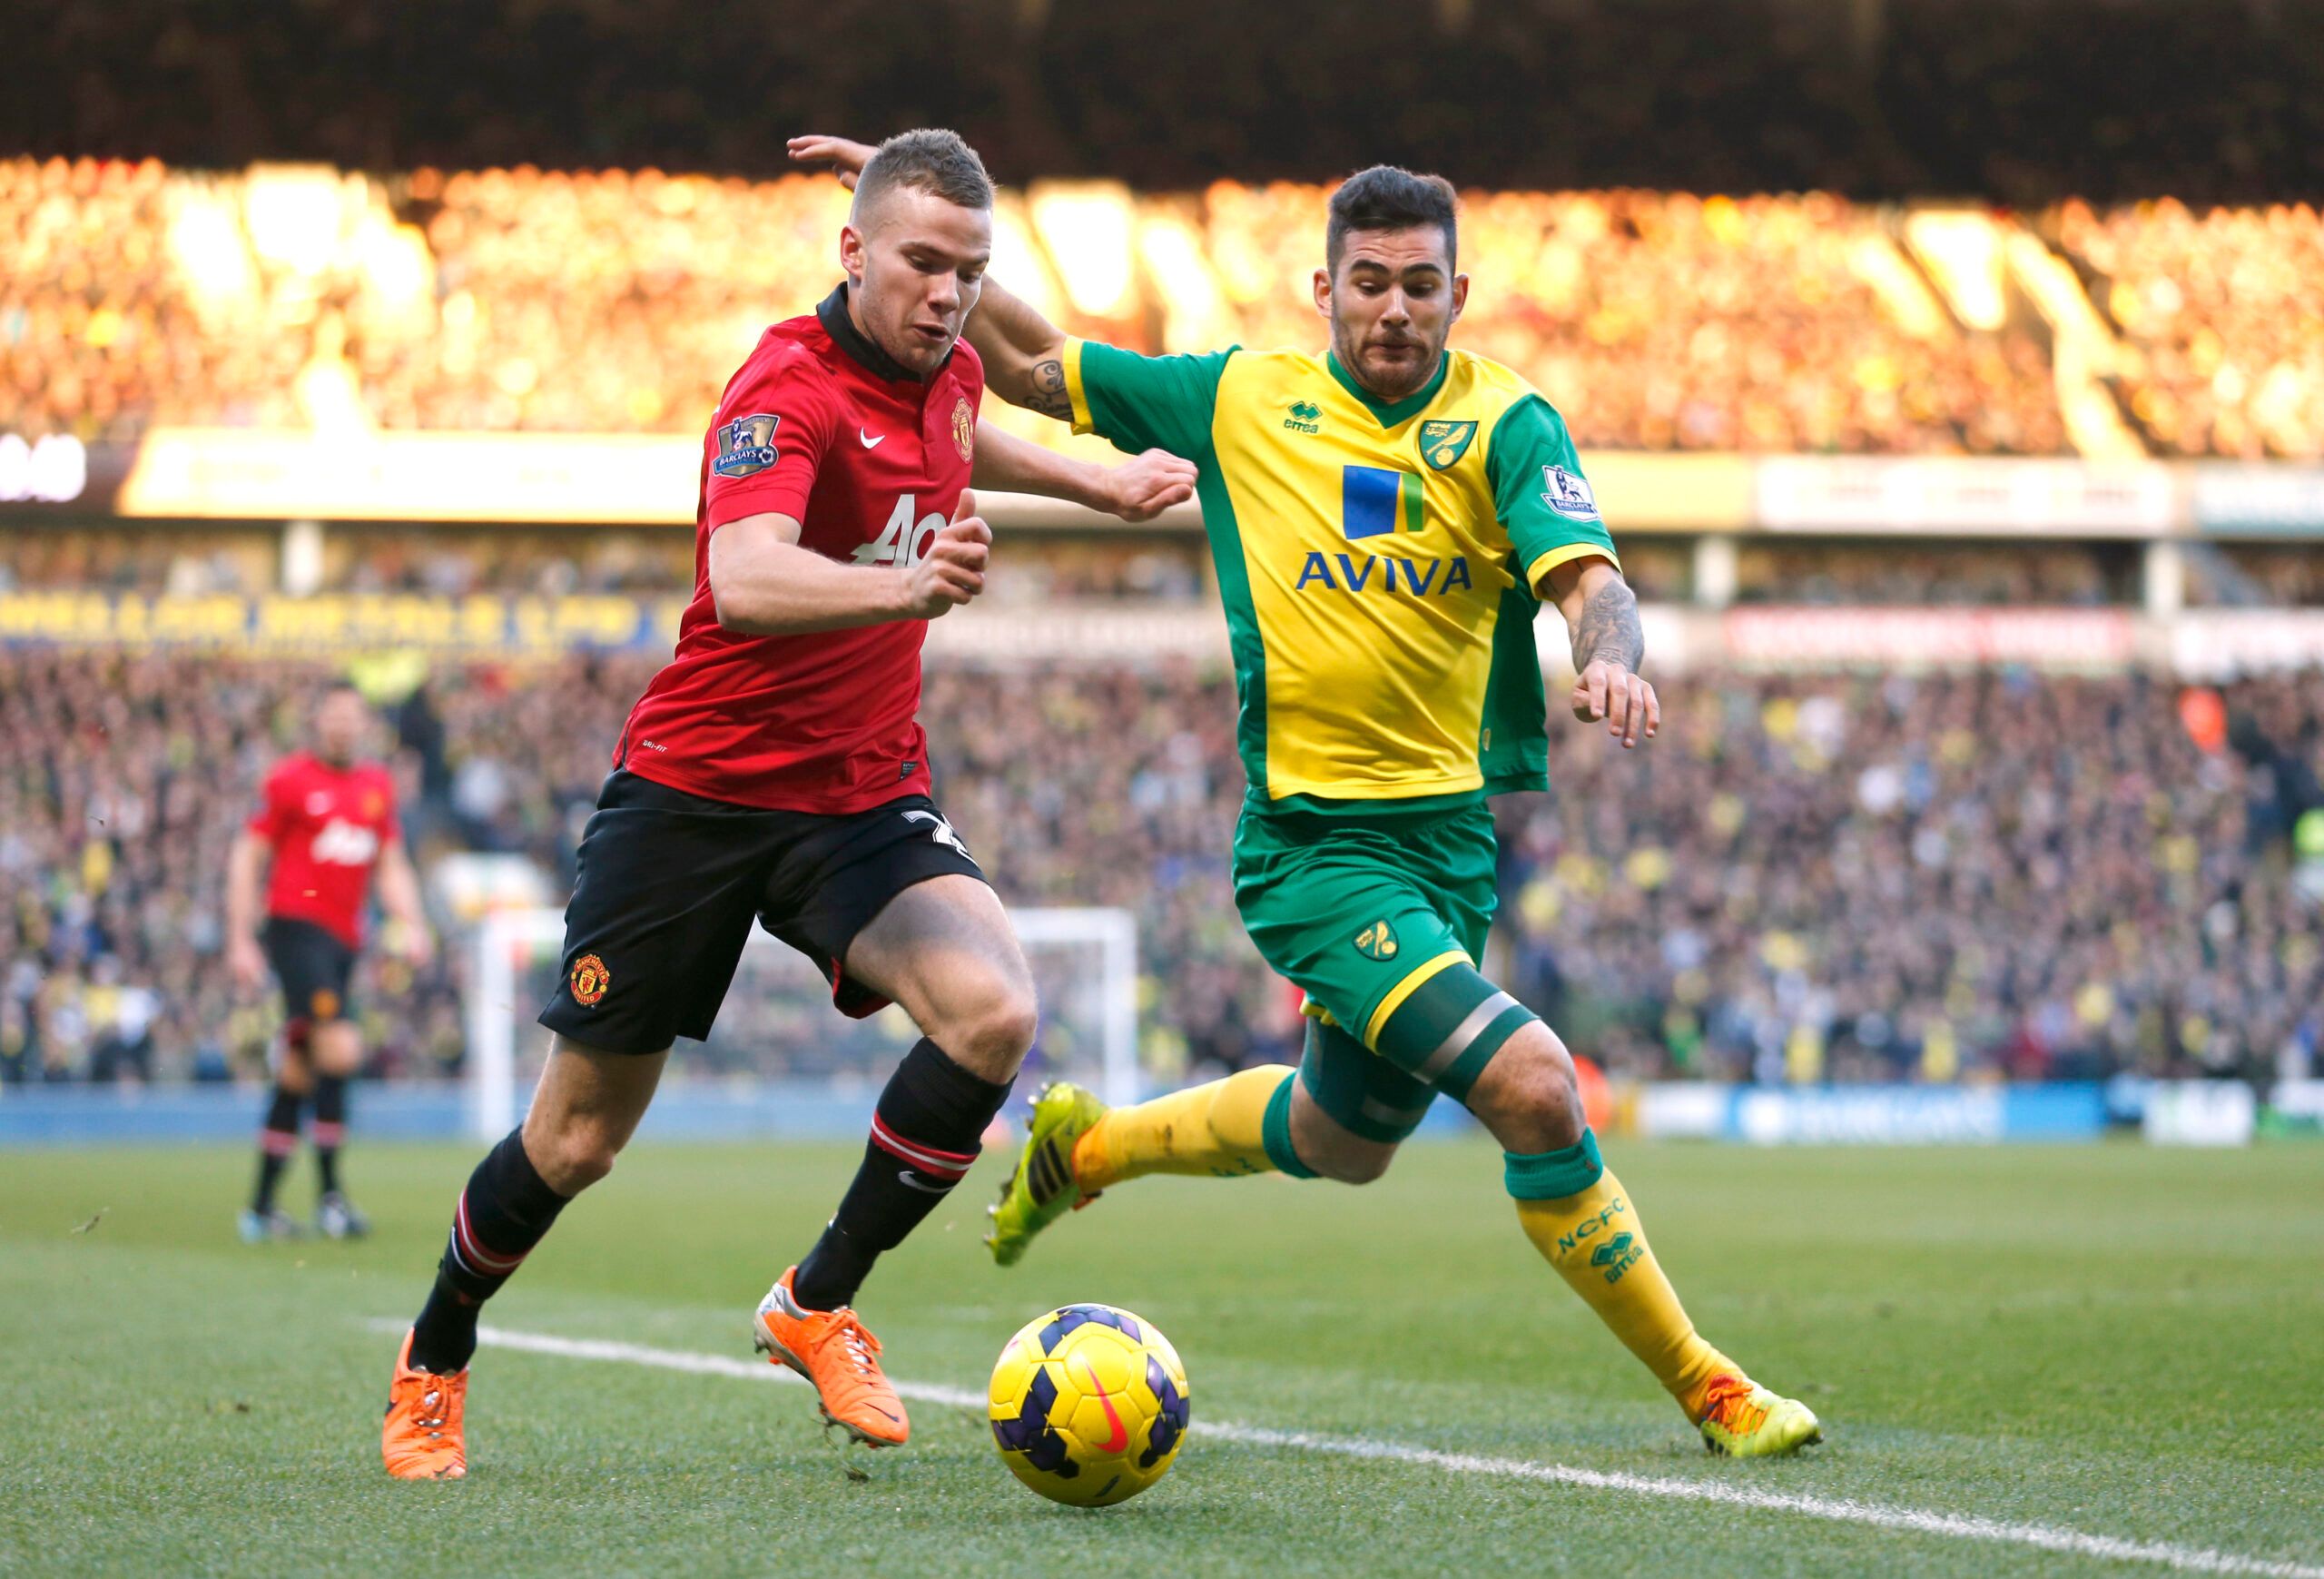 Football - Norwich City v Manchester United - Barclays Premier League - Carrow Road - 28/12/13 
Norwich City's Bradley Johnson (R) and Manchester United's Tom Cleverley in action 
Mandatory Credit: Action Images / John Sibley 
Livepic 
EDITORIAL USE ONLY. No use with unauthorized audio, video, data, fixture lists, club/league logos or live services. Online in-match use limited to 45 images, no video emulation. No use in betting, games or single club/league/player publications.  Please contact yo